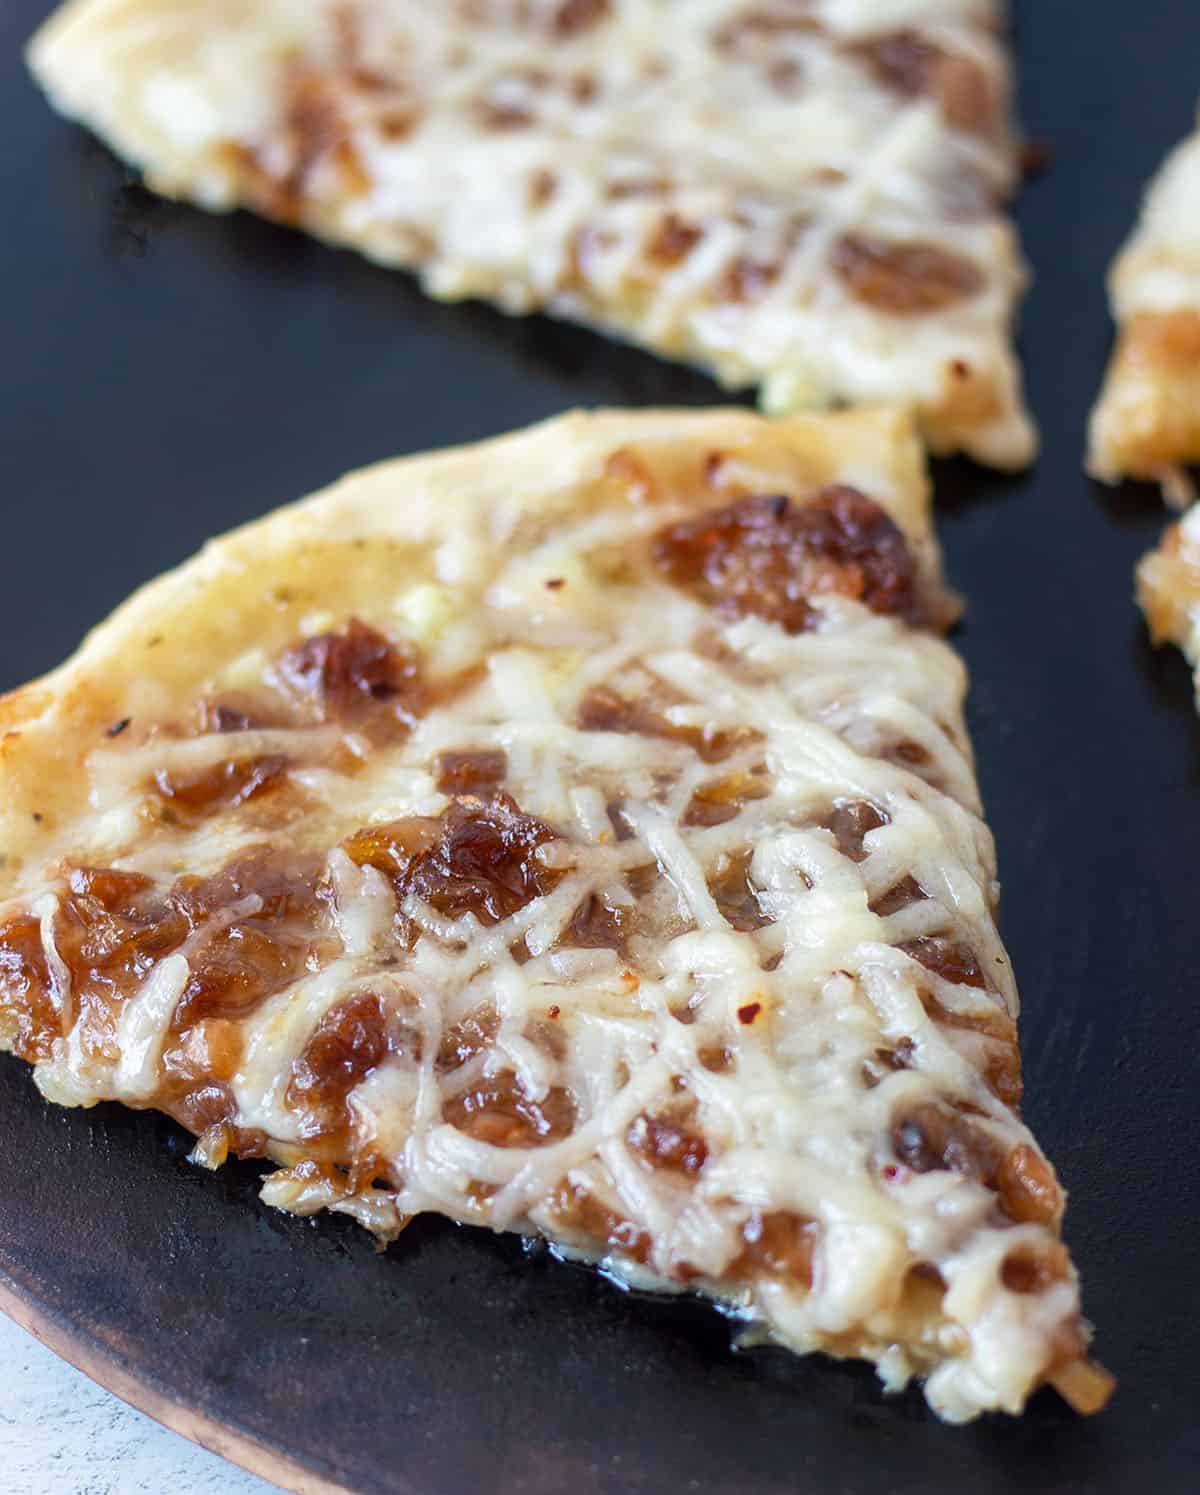 Caramelized Onion Pizza cut into slices on a pizza stone.